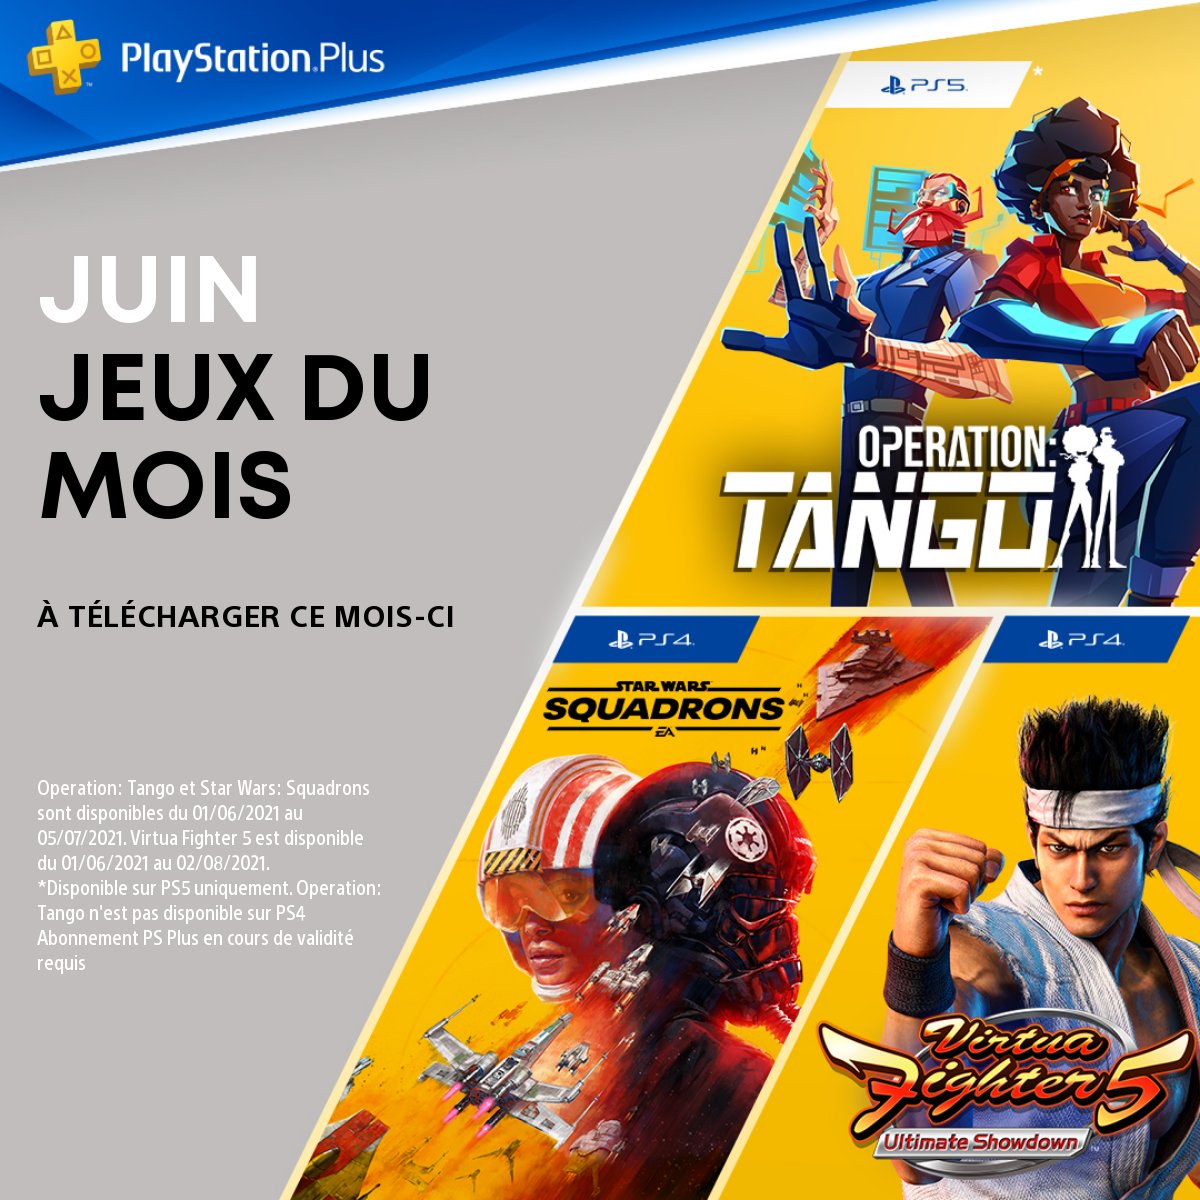 PlayStation France on Twitter: "Vos prochains jeux PlayStation Plus seront disponibles le 1er ! Les voici : • Operation: Tango (PS5) • Star Wars Squadrons (PS4) • Fighter 5 Ultimate